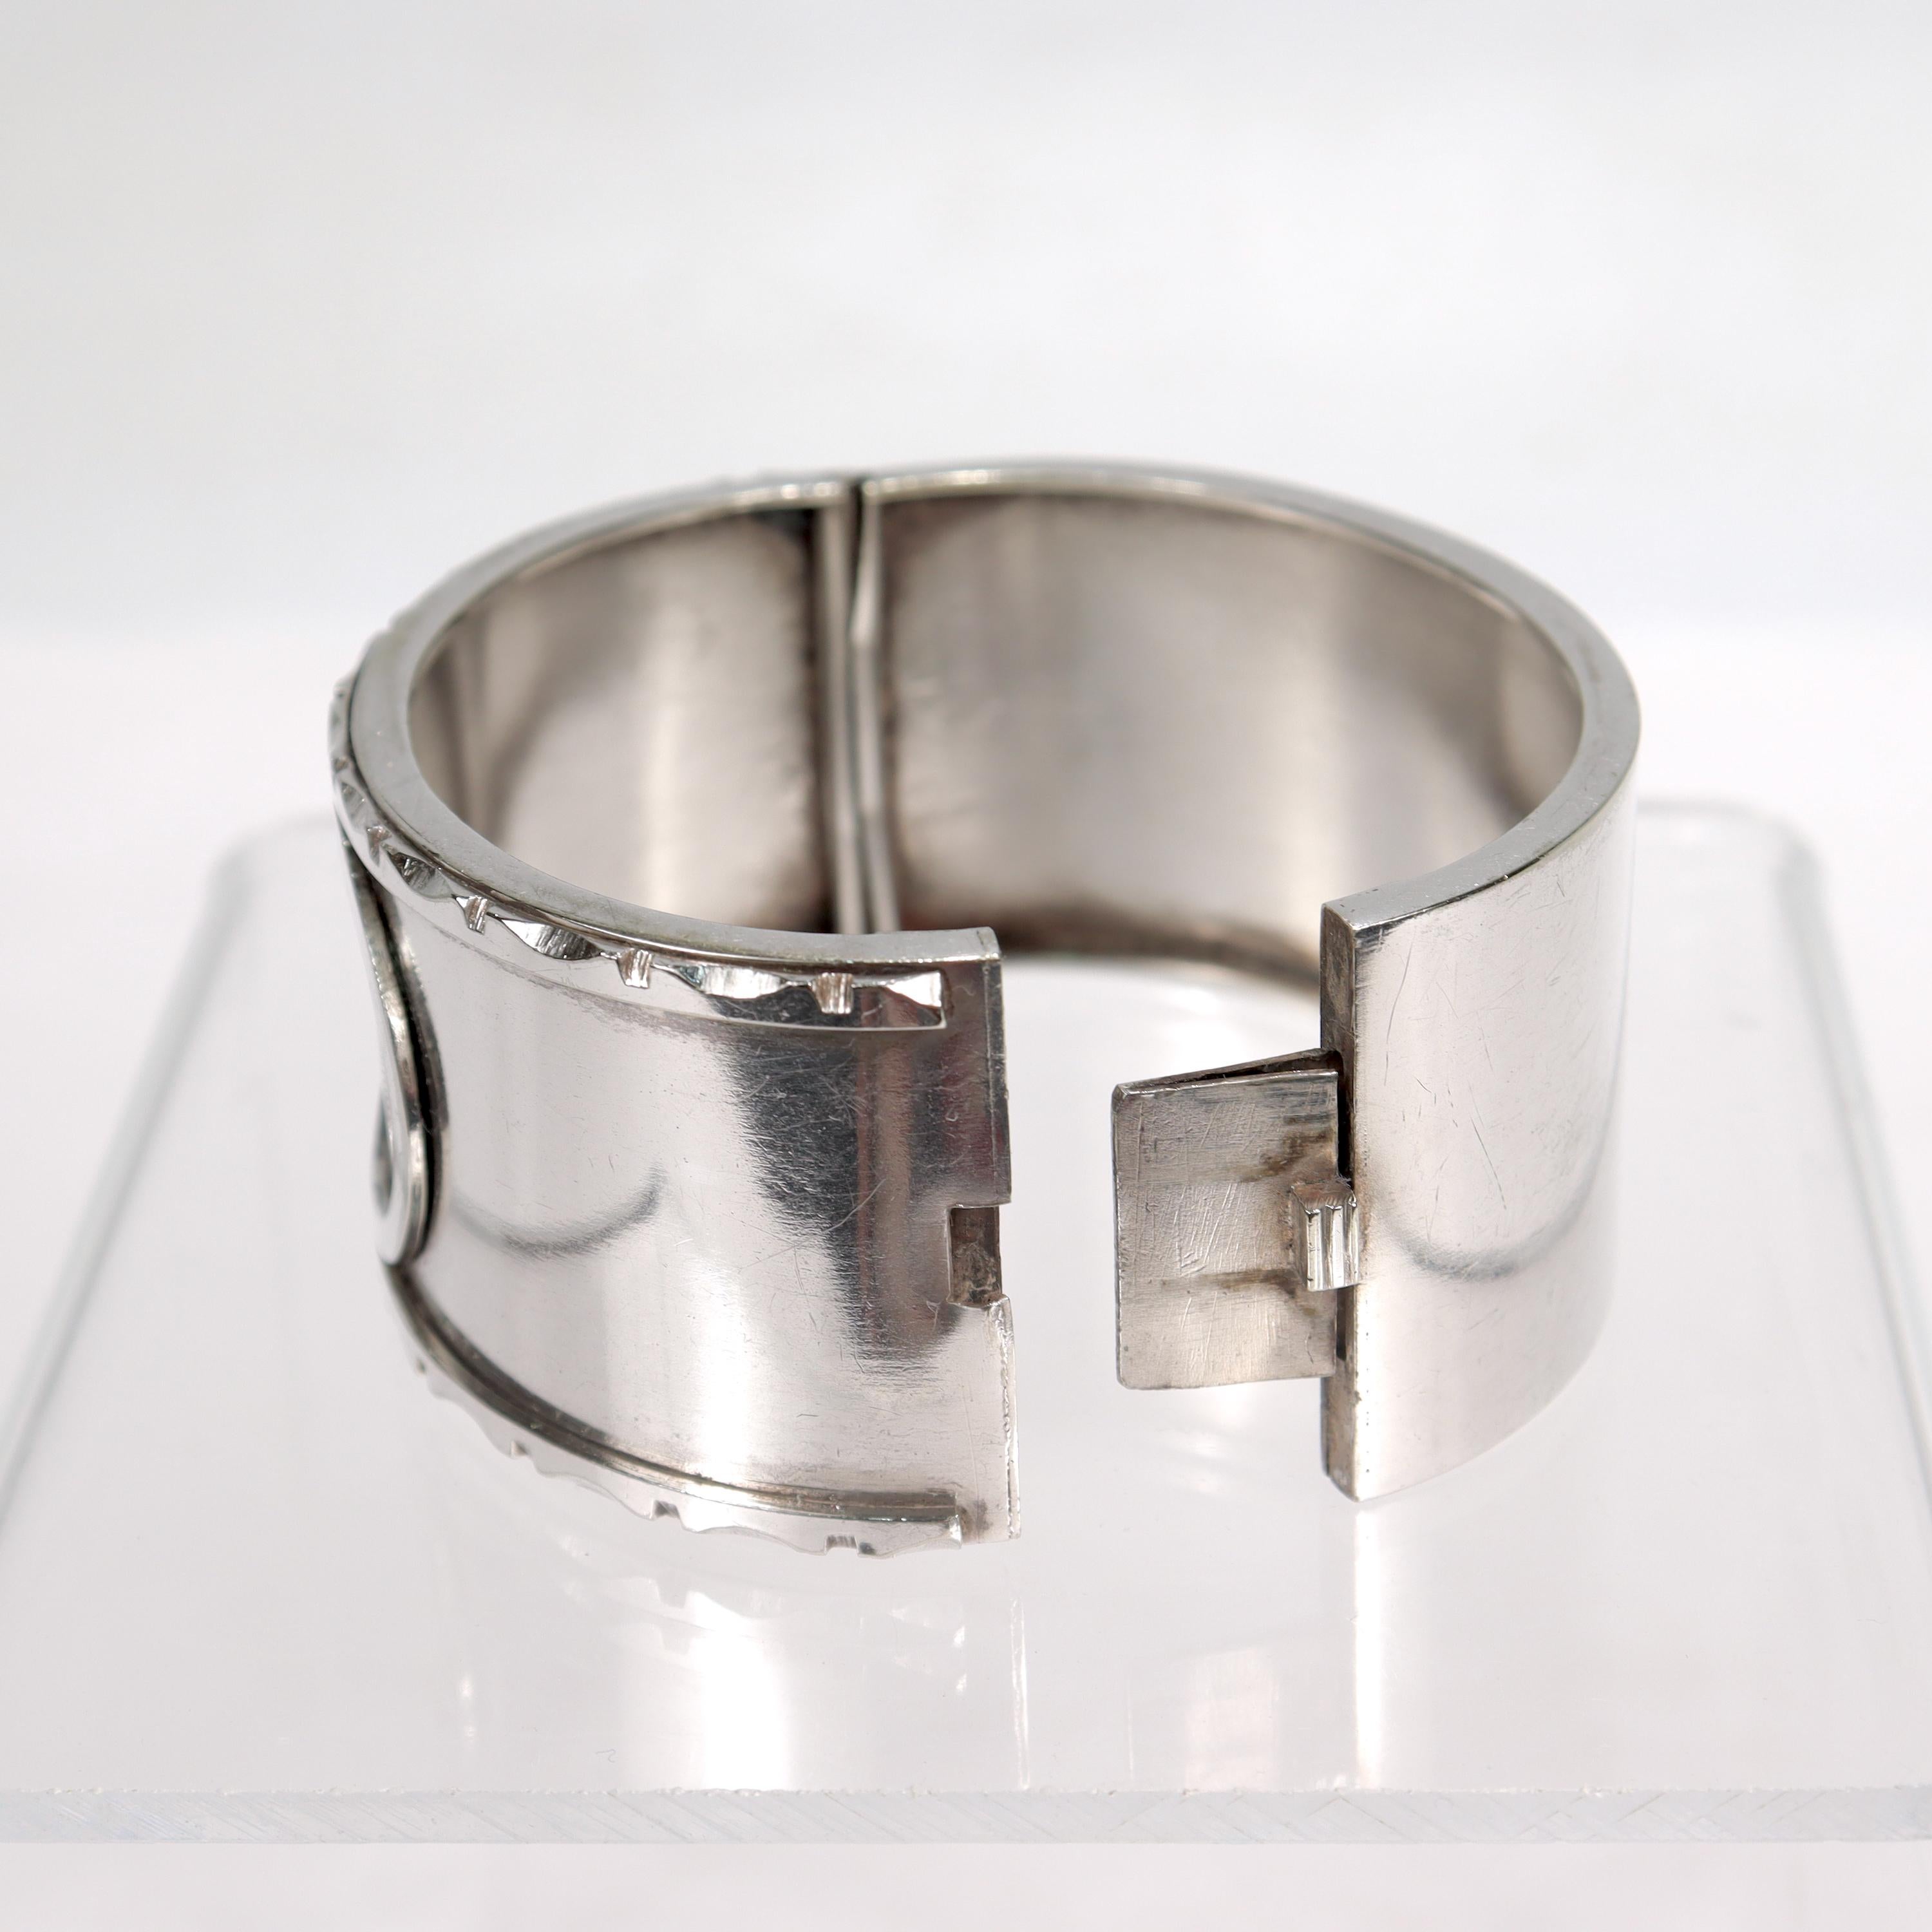 Antique Aesthetic Movement Sterling Silver Bangle Bracelet with an Etched Bird For Sale 5